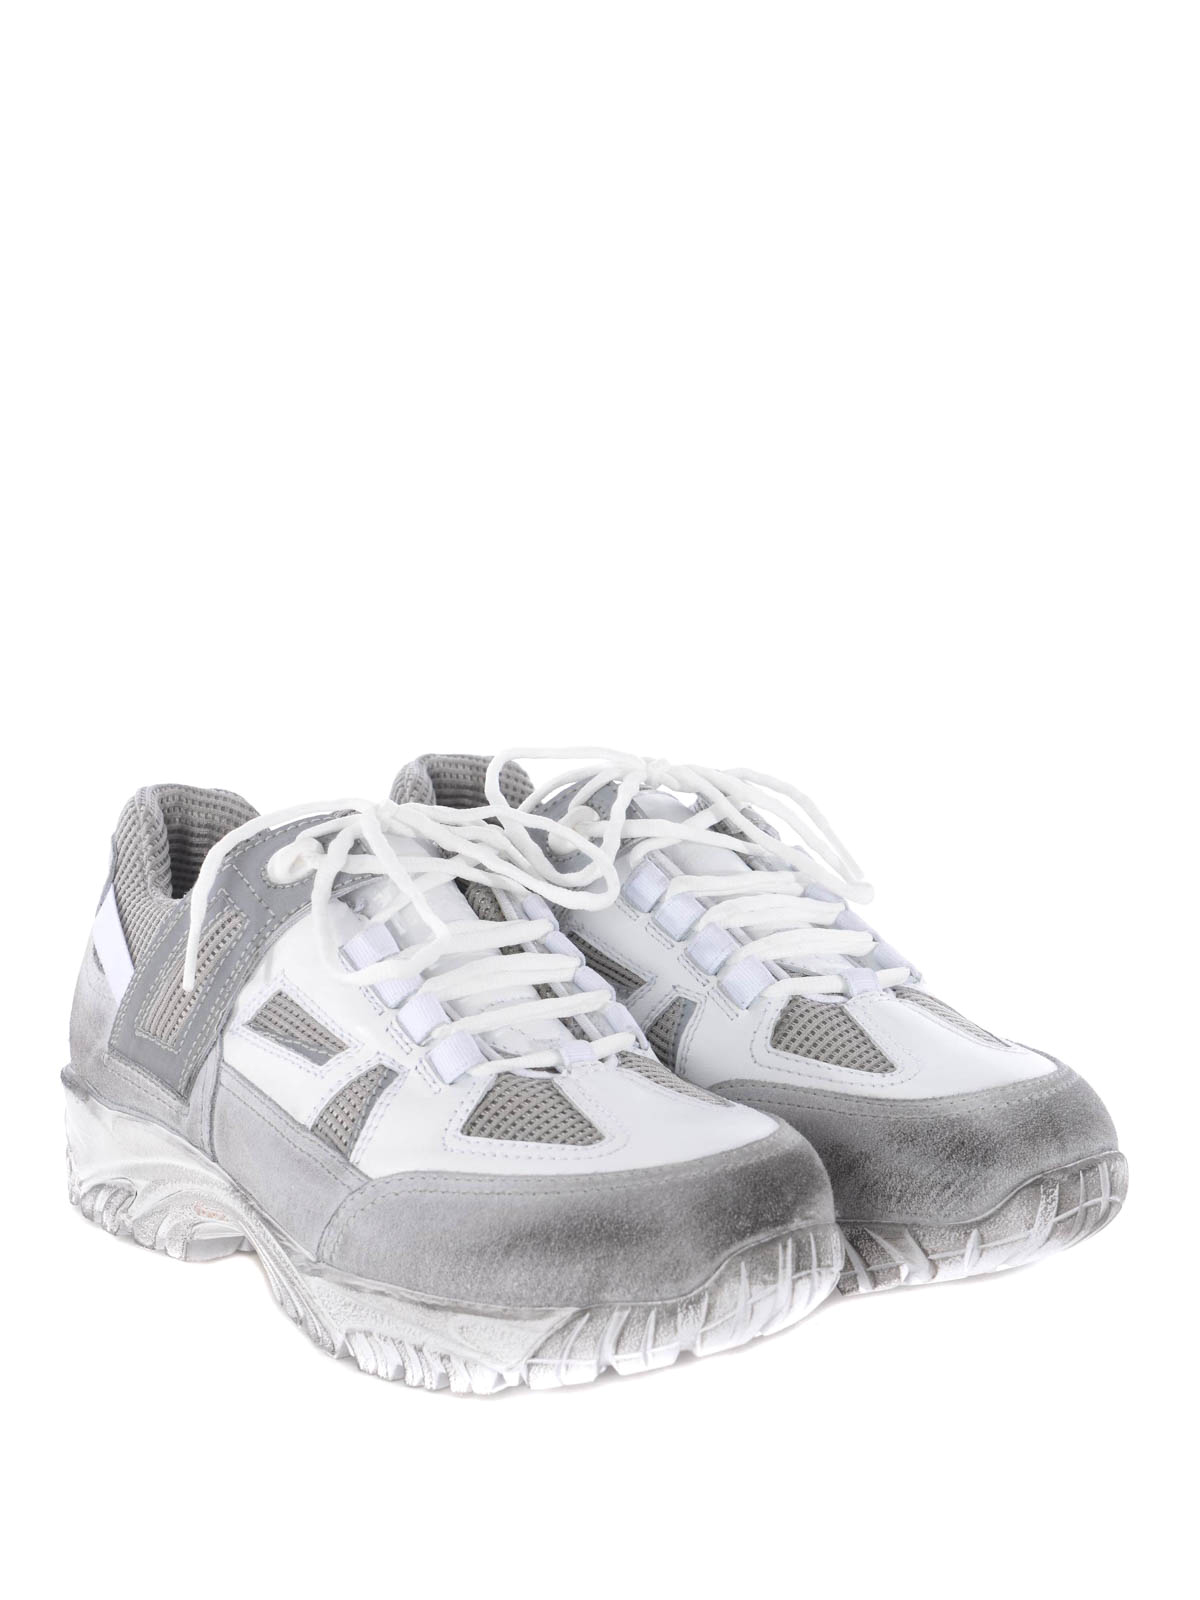 Maison Margiela - Dirty treatment Security sneakers - trainers ...